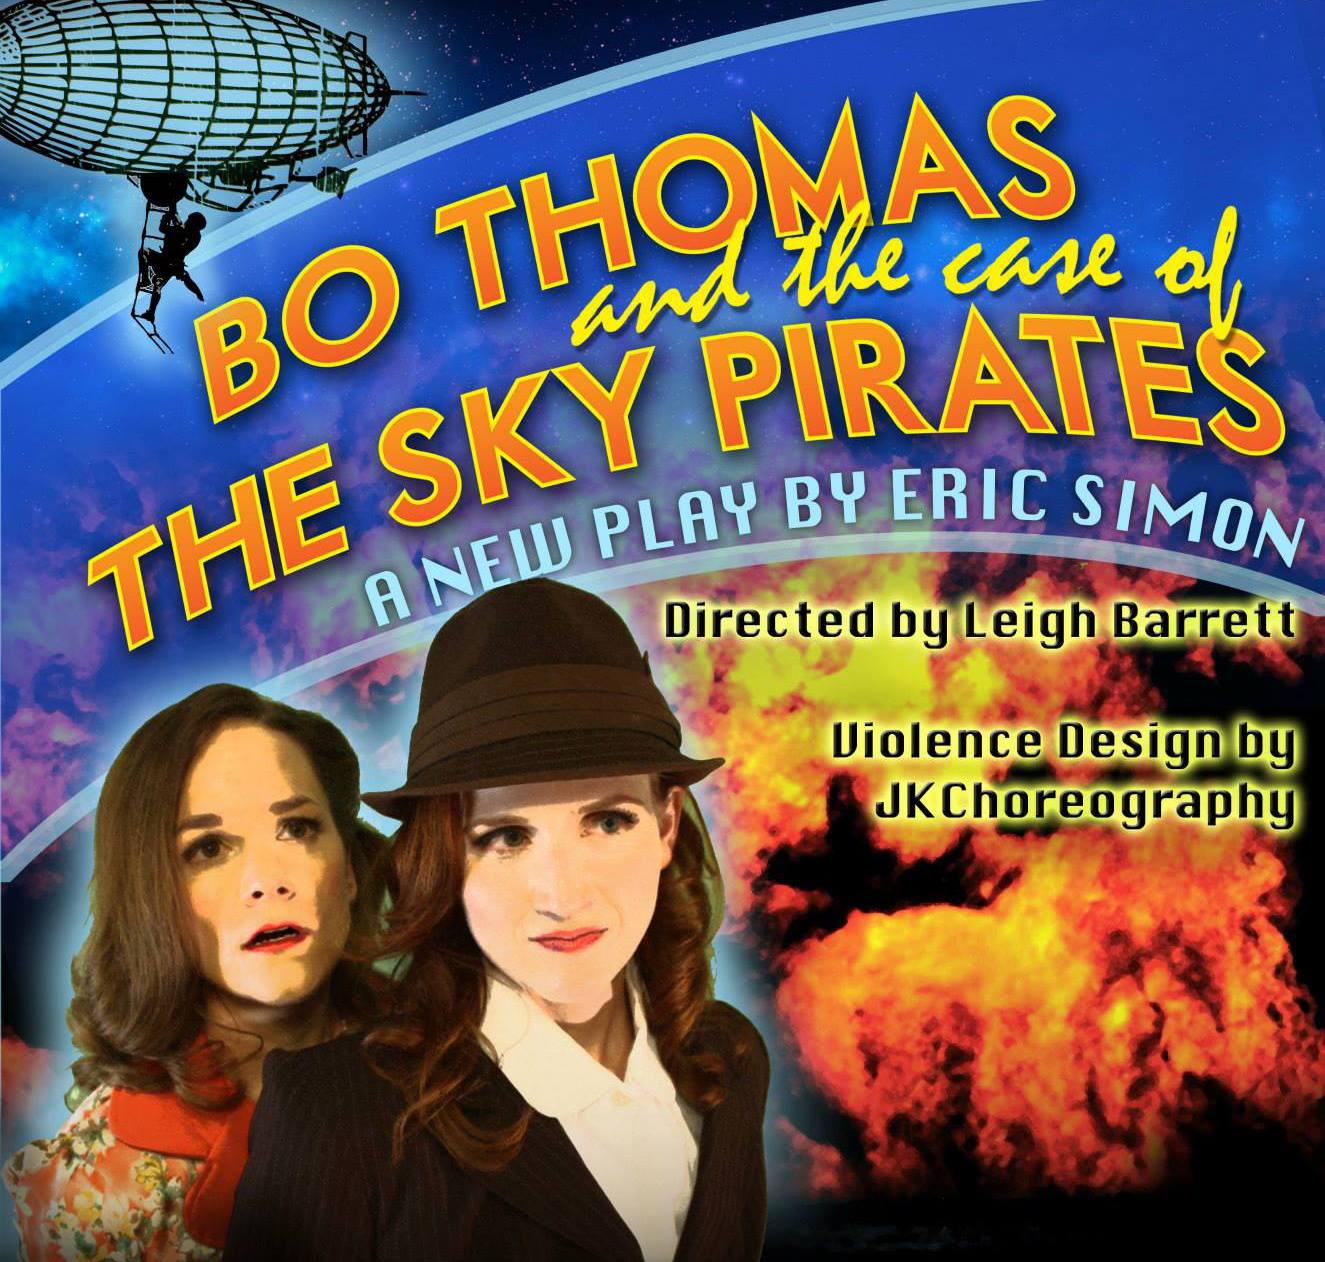 Bo Thomas and the Case of the Sky Pirates poster image of a 1940s female detective with a damsel in distress hiding behind her, a flying blimp and fire in the background